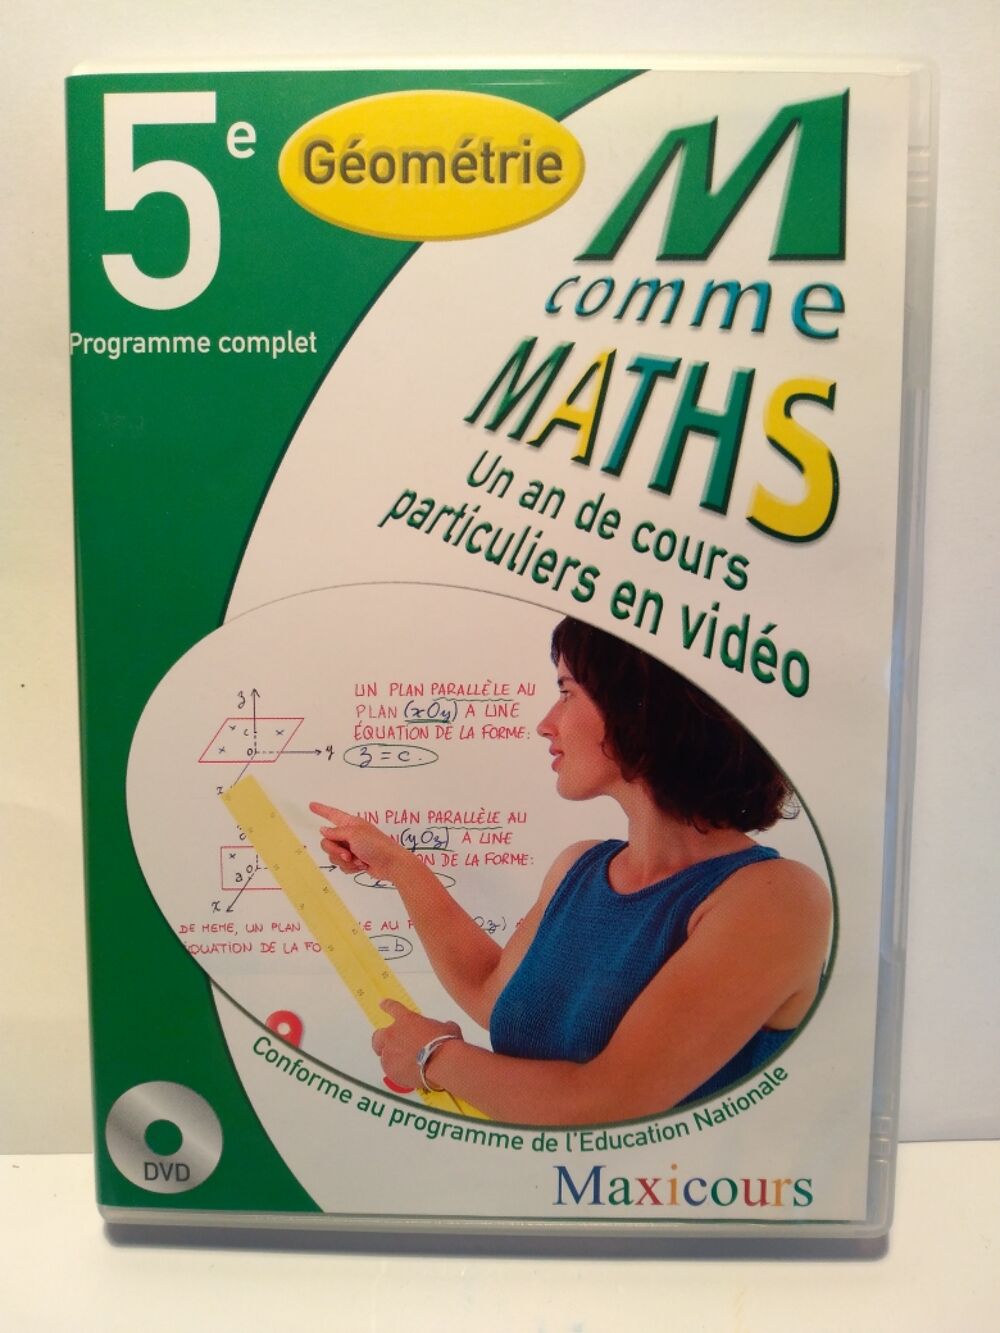 M comme Maths DVD et blu-ray